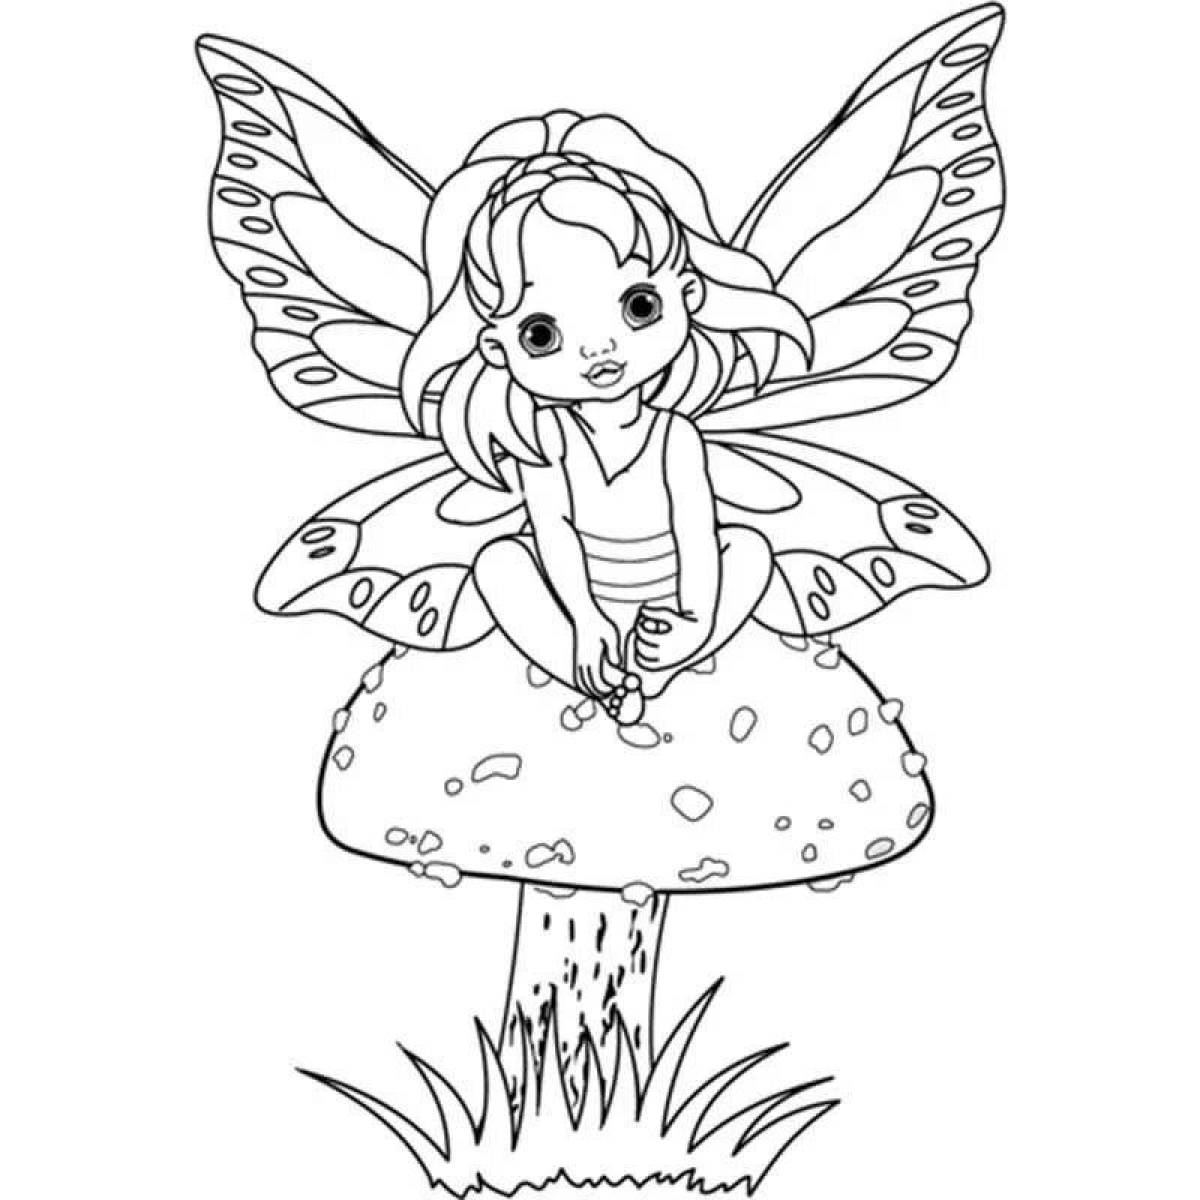 Live little fairy coloring book